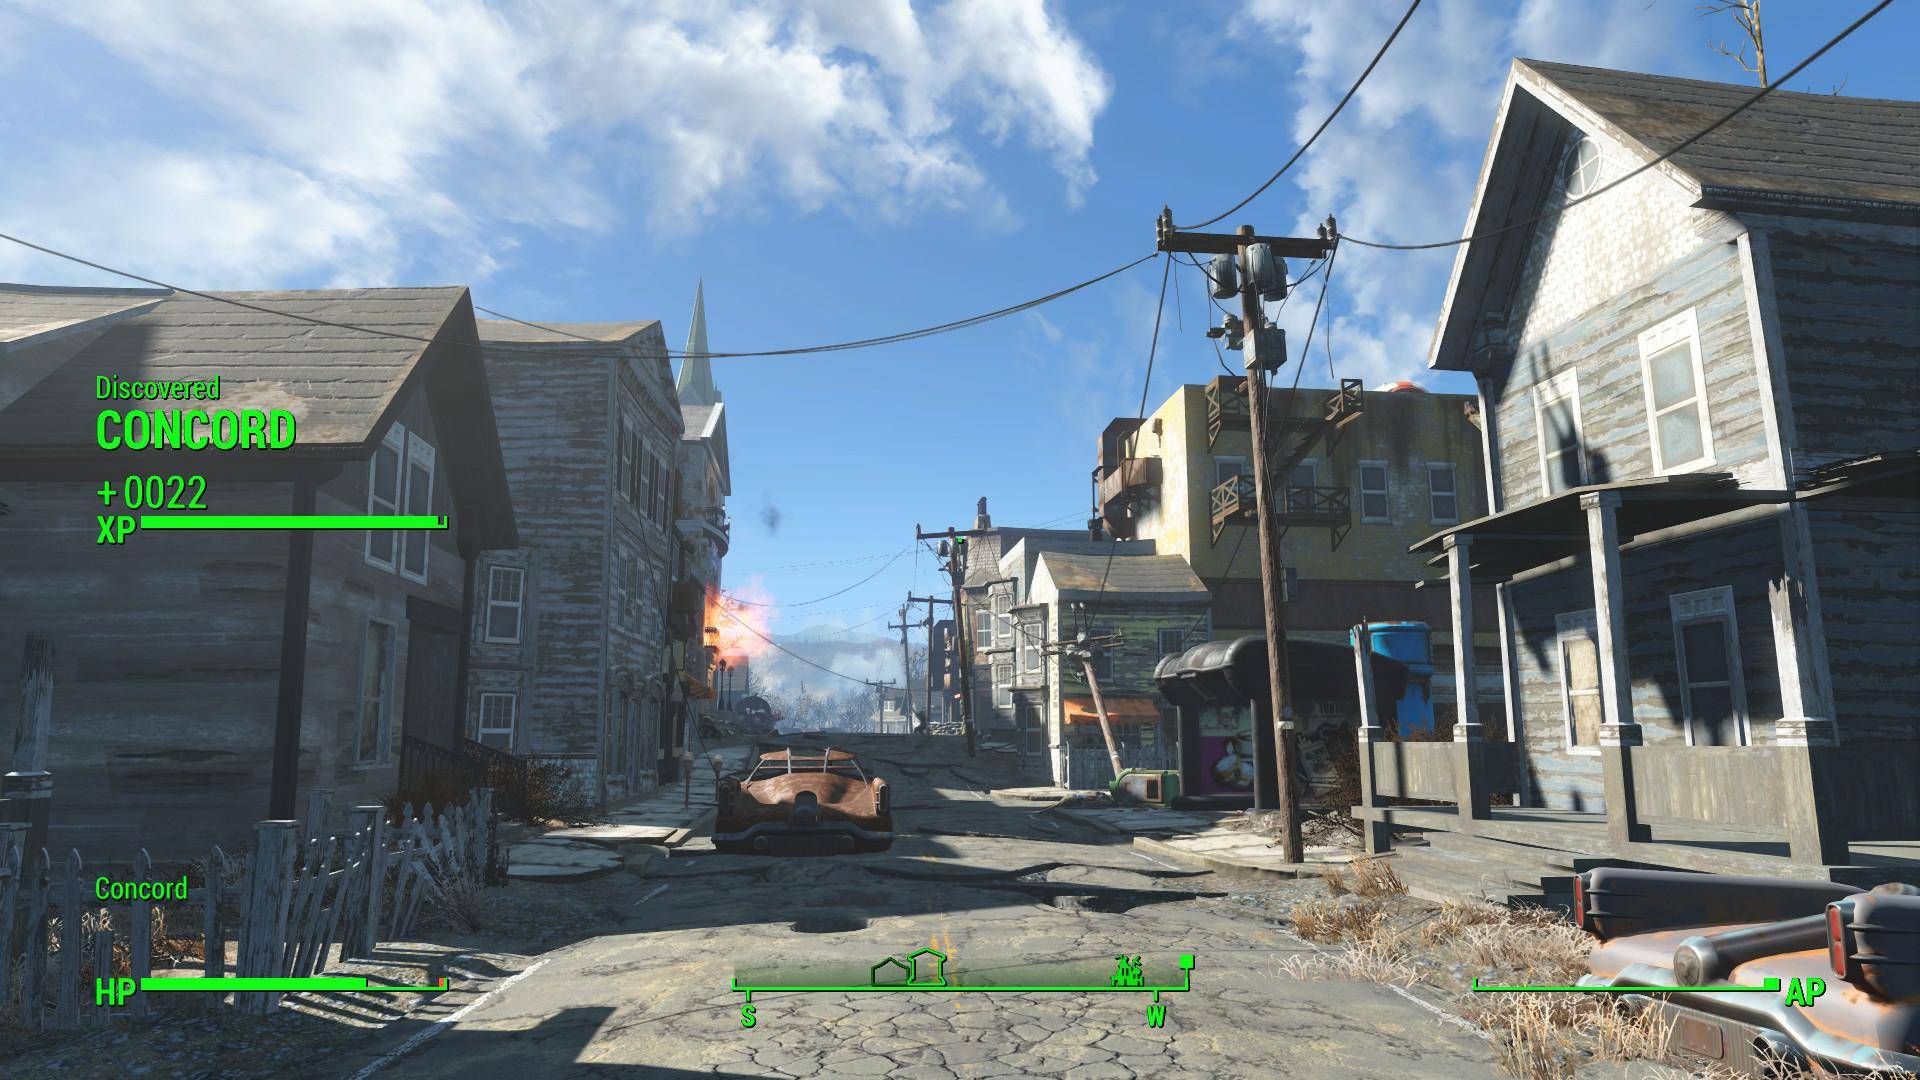 Best Fallout 4 Mods For Graphics Performance Weapons Crafting And More Gamepur